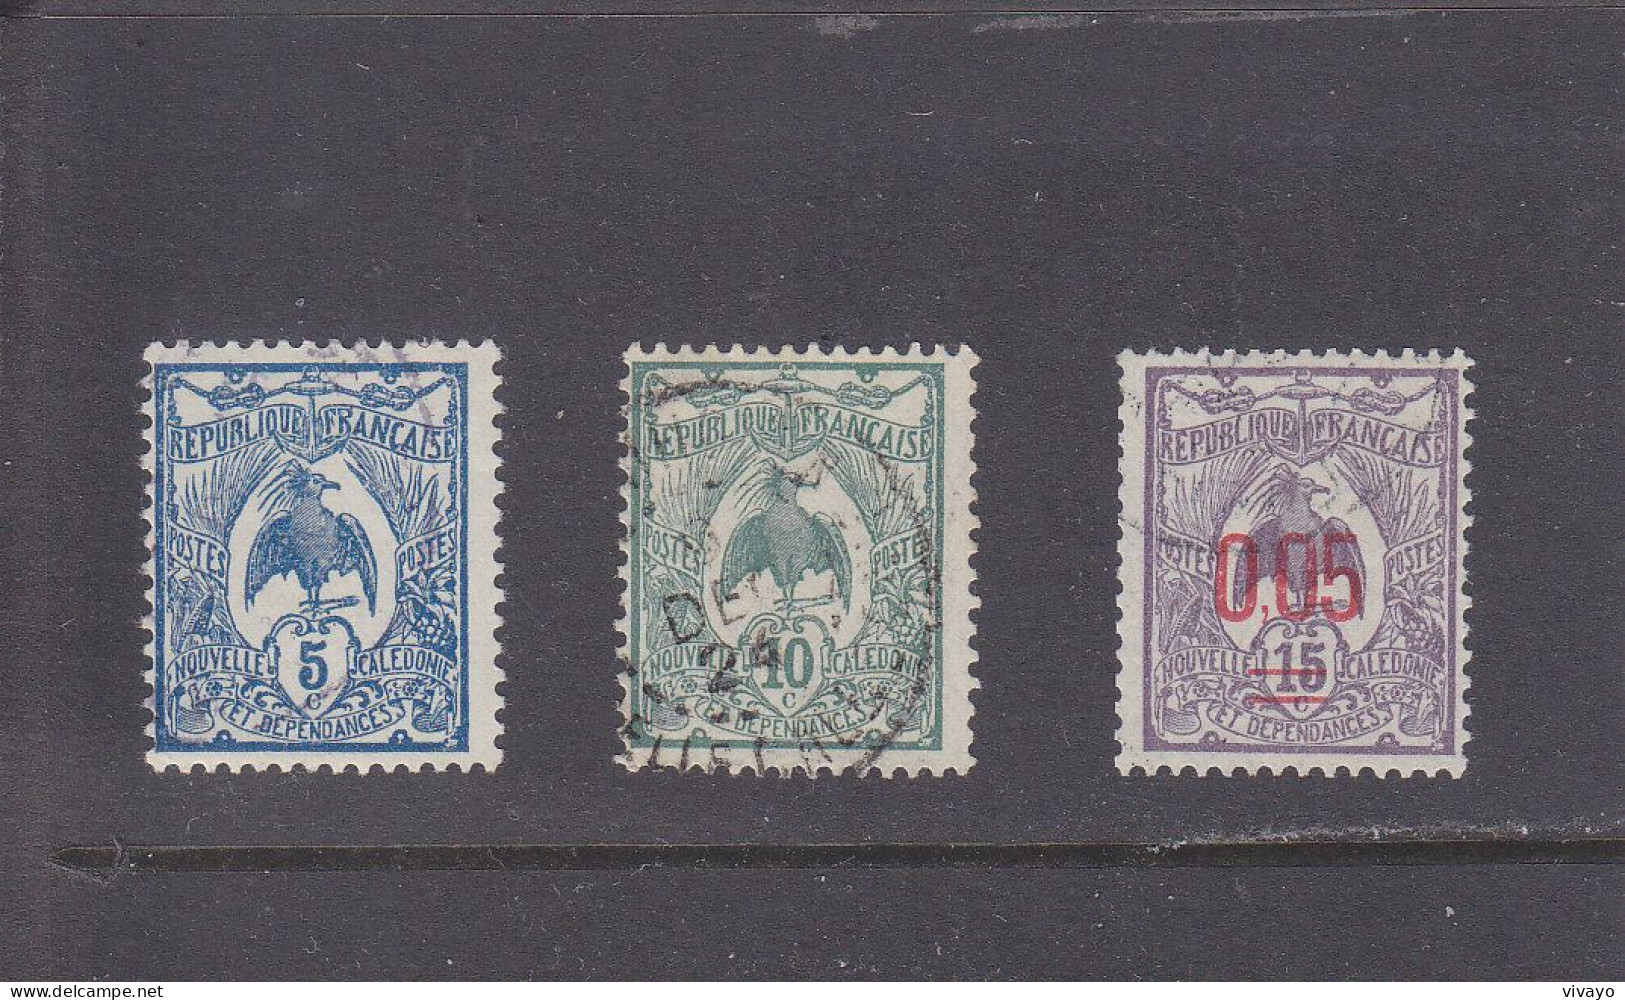 NOUVELLE CALEDONIE - O / FINE CANCELLED - 1922 - KAGU - OVERPRINTS - Yv. 114, 115, 126  - Mi. 111, 112, 129 - Used Stamps